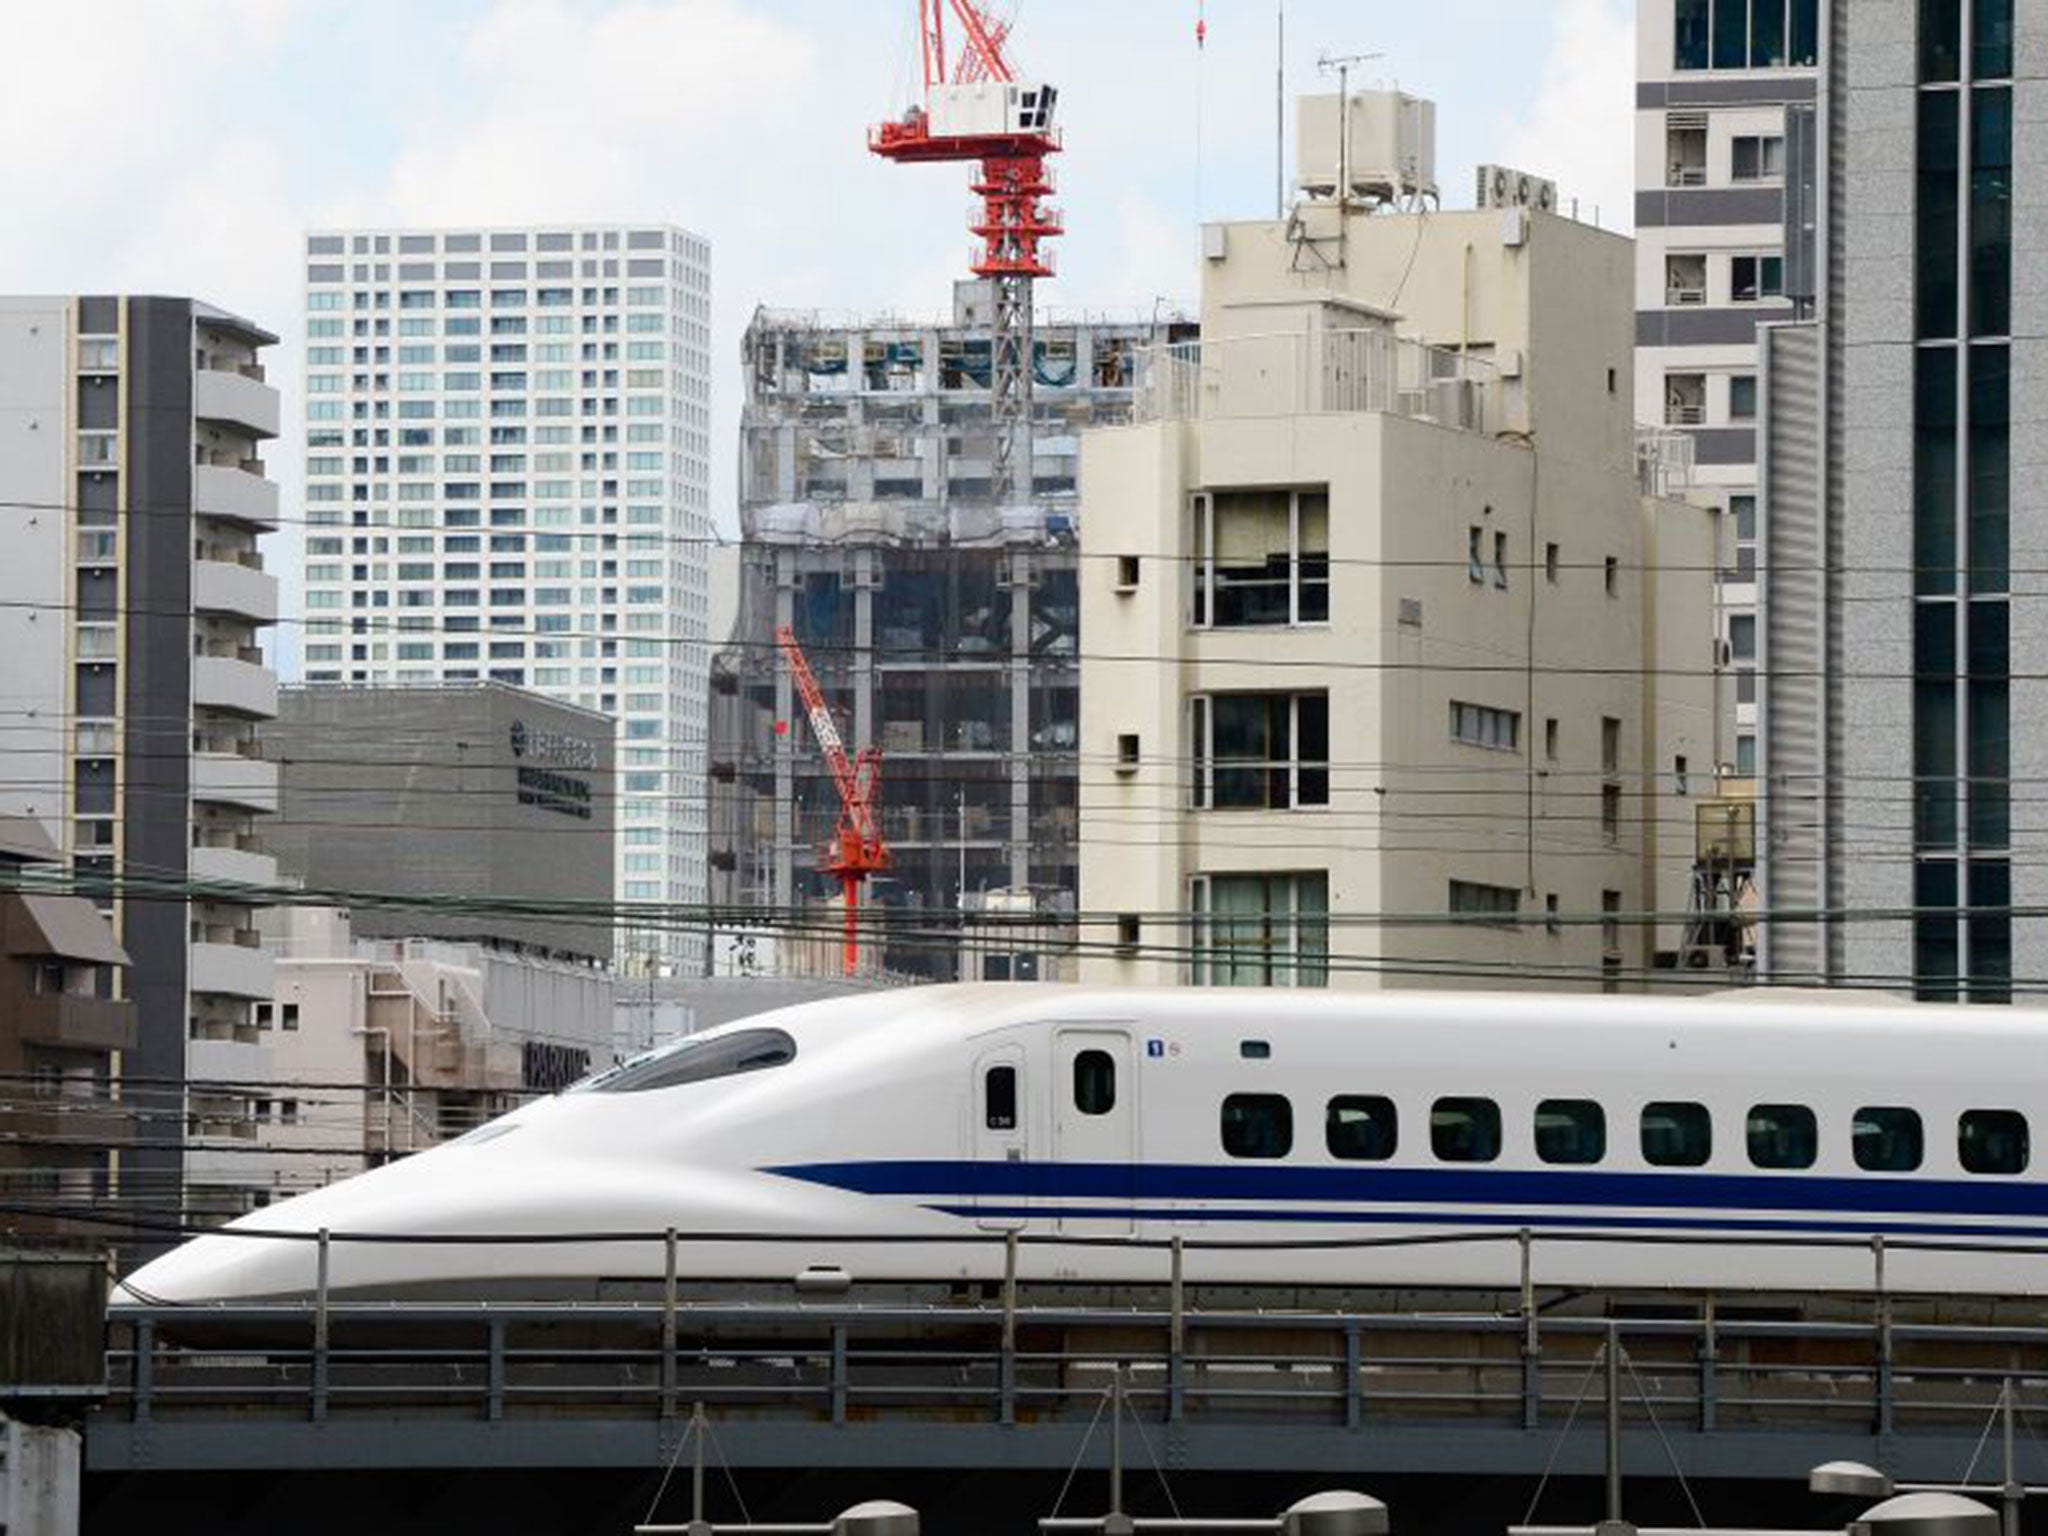 The latest model Bullet Train, with a space-age-like elongated nose, takes just two hours and 25 minutes